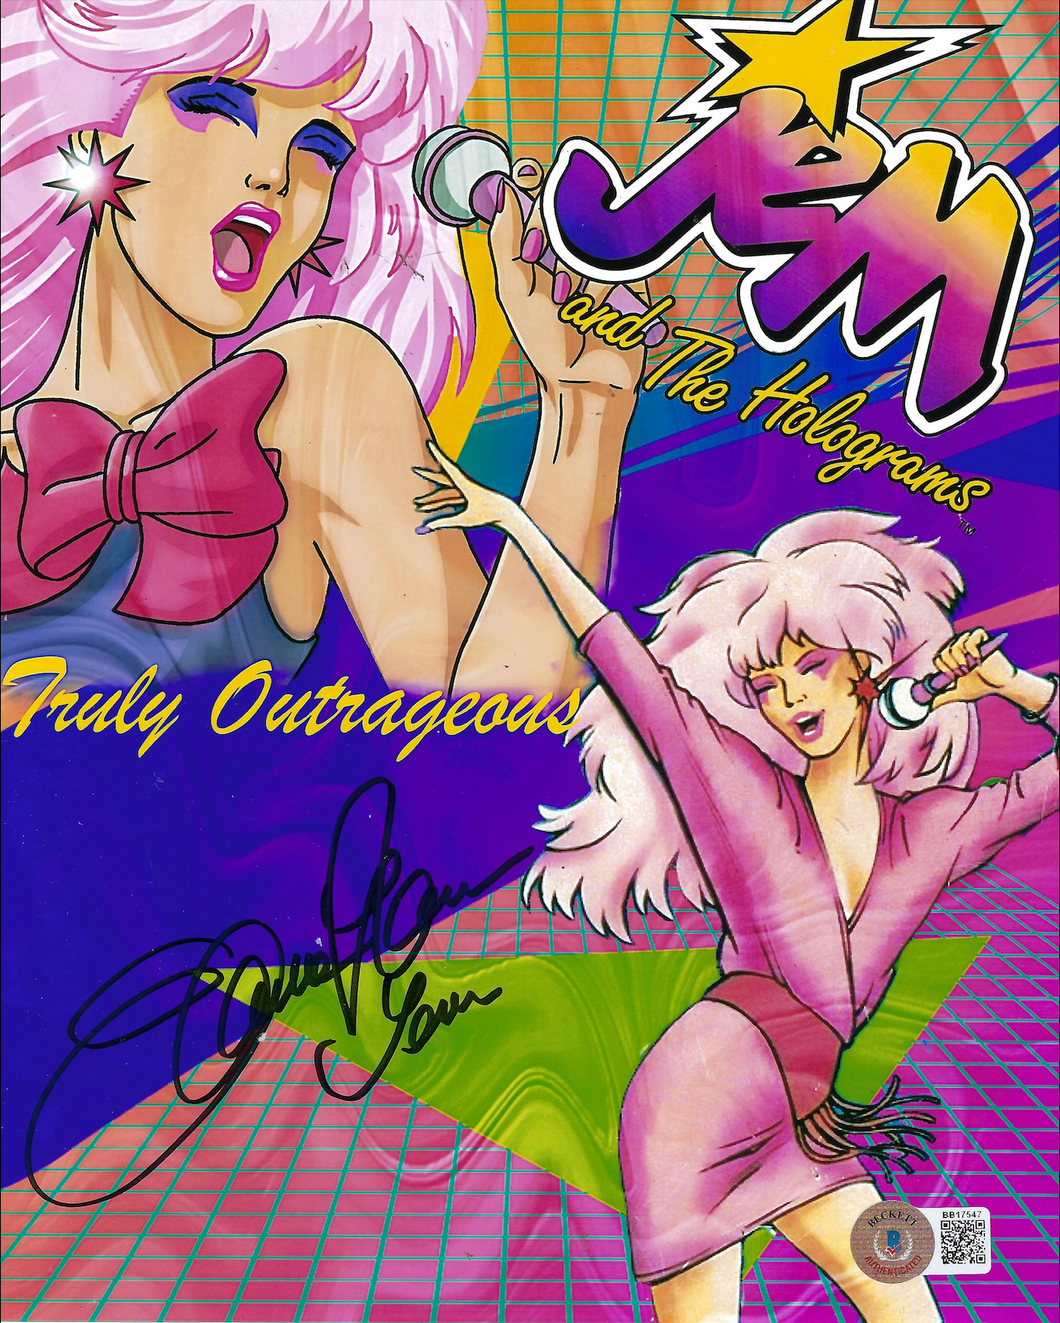 Jem and the Holgrams (Truly Outrageous) 8x10 photo signed by Samantha Newark (voice of Jem)